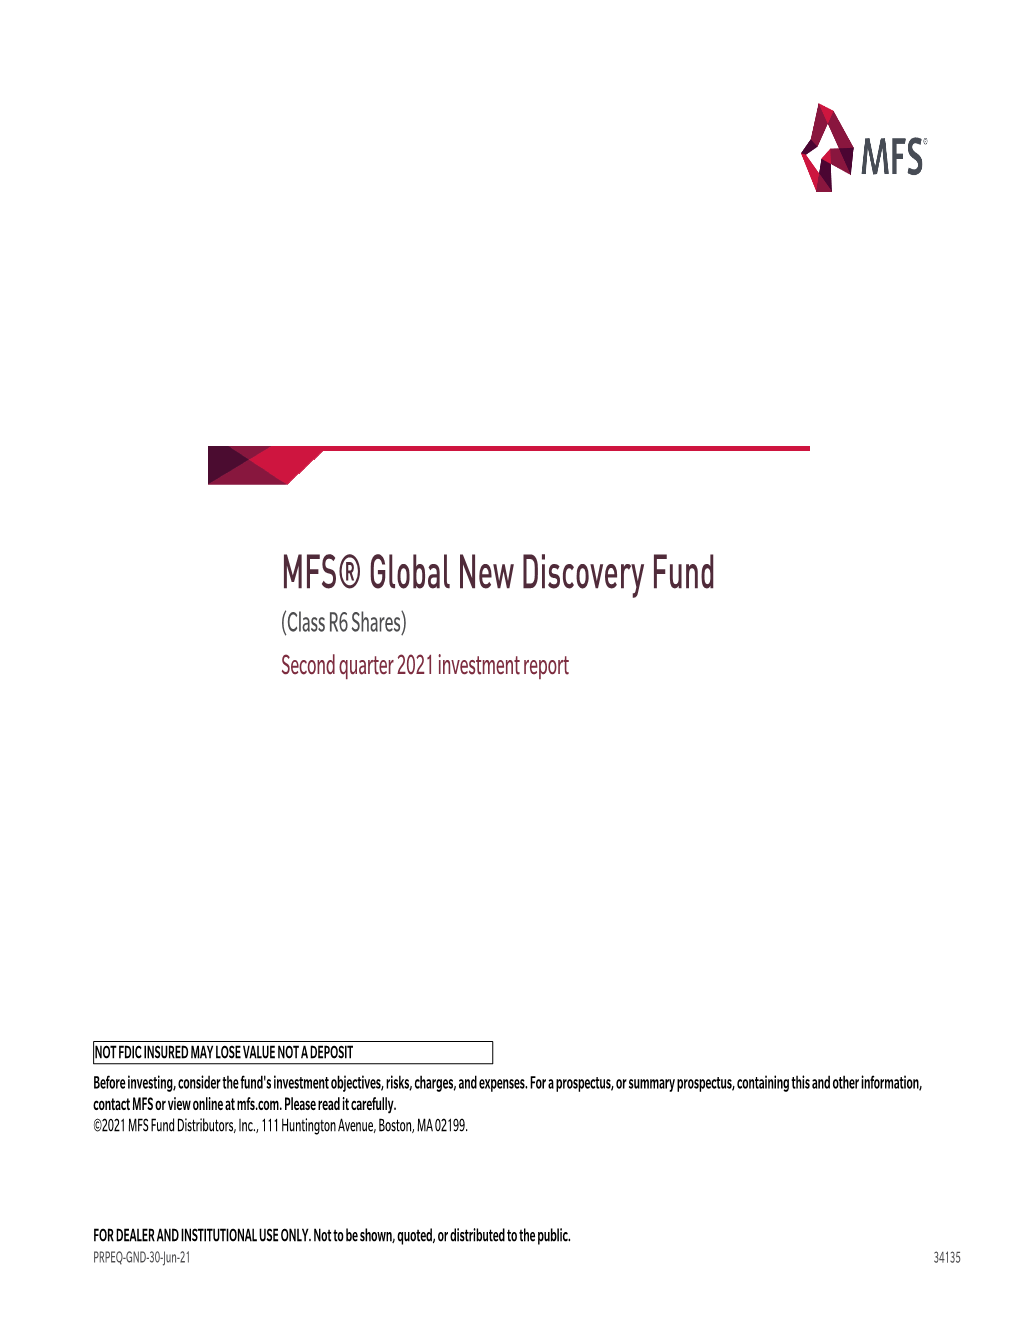 MFS® Global New Discovery Fund (Class R6 Shares) Second Quarter 2021 Investment Report